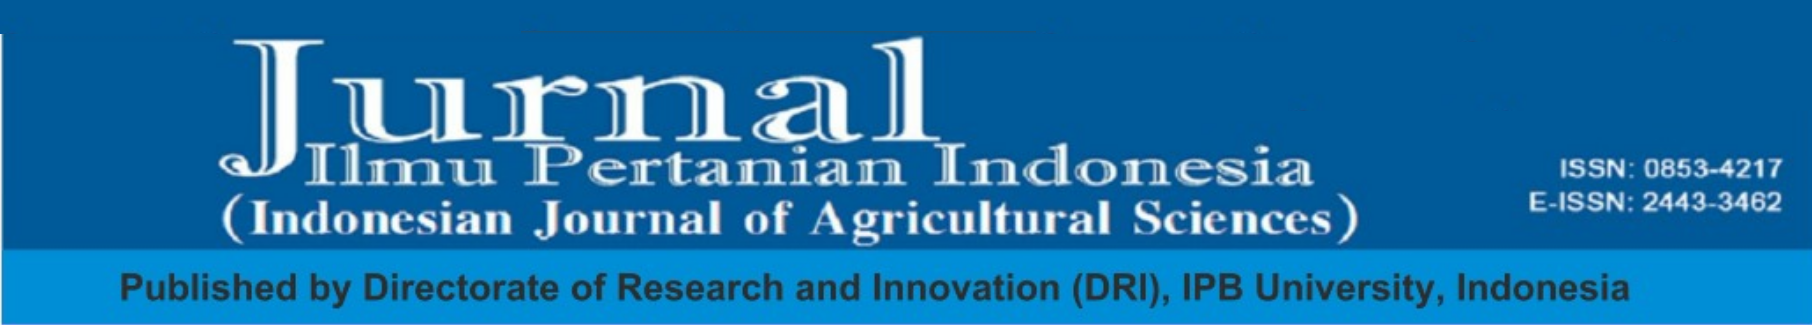 Jurnal Ilmu Pertanian Indonesia (Indonesian Journal of Agricultural Sciences)